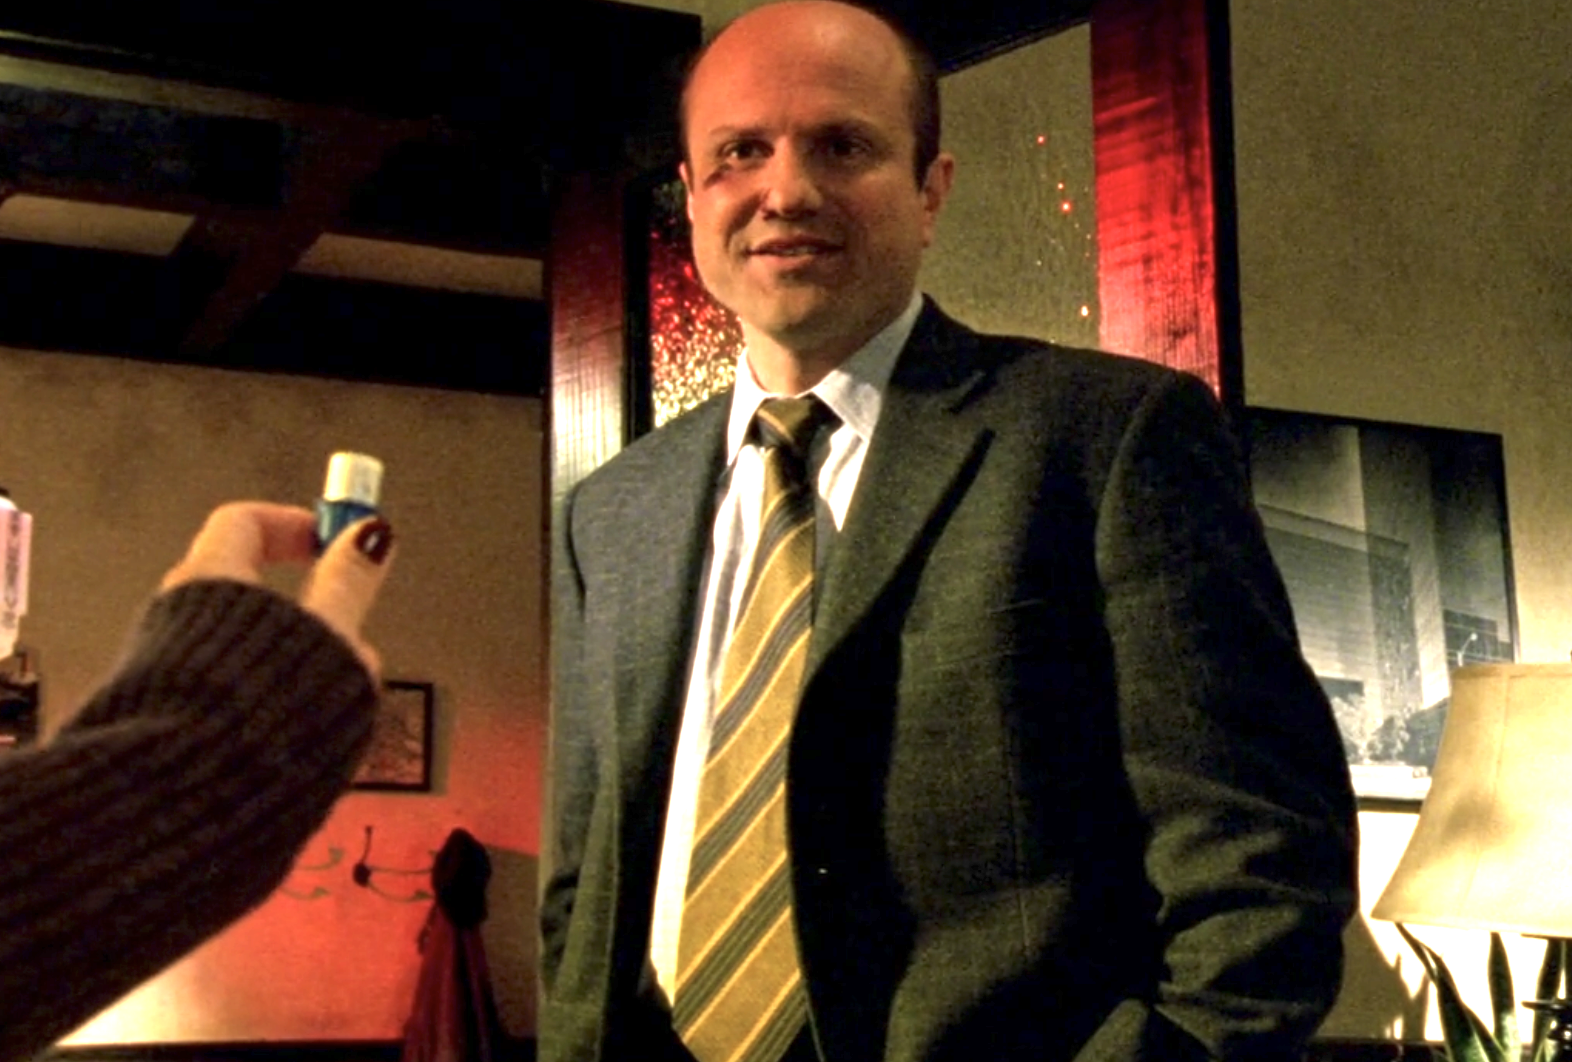 Screenshot from S1E9 of Veronica Mars. Enrico Colantoni as Keith Mars is standing in at Veronica's desk inside Mars Investigations. He is wearing a suit and looking at Veroncia's outstretched hand which is holding a vial. Keith is smiling a little. He has a bruise under his right eye.